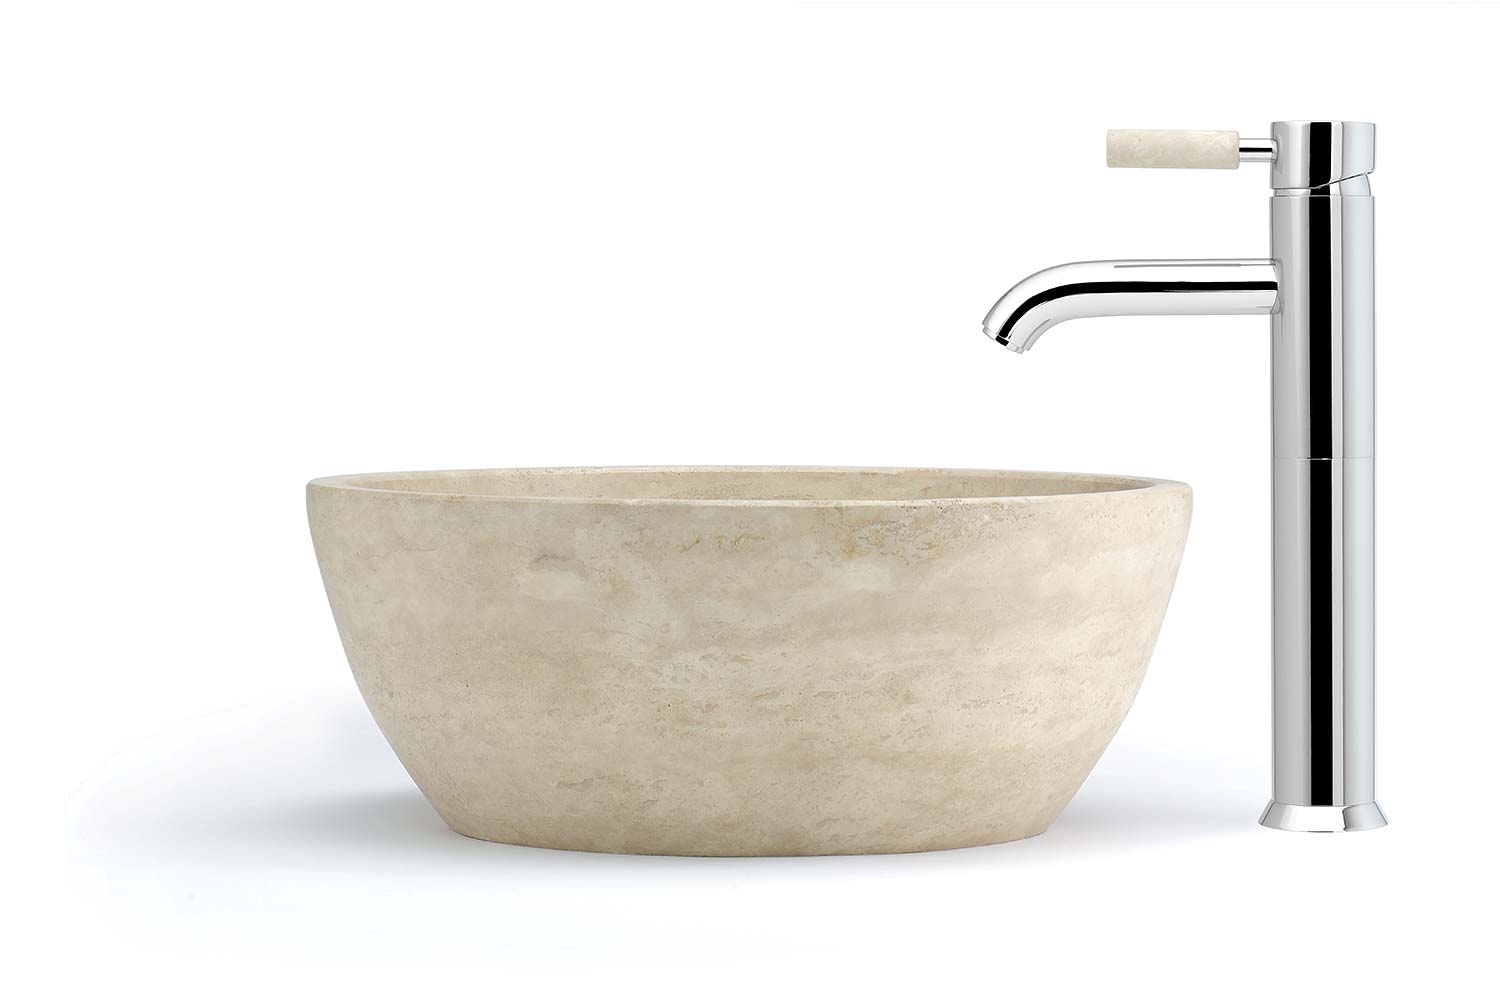 A single lever extended mono basin mixer over a stone bowl against a white background.